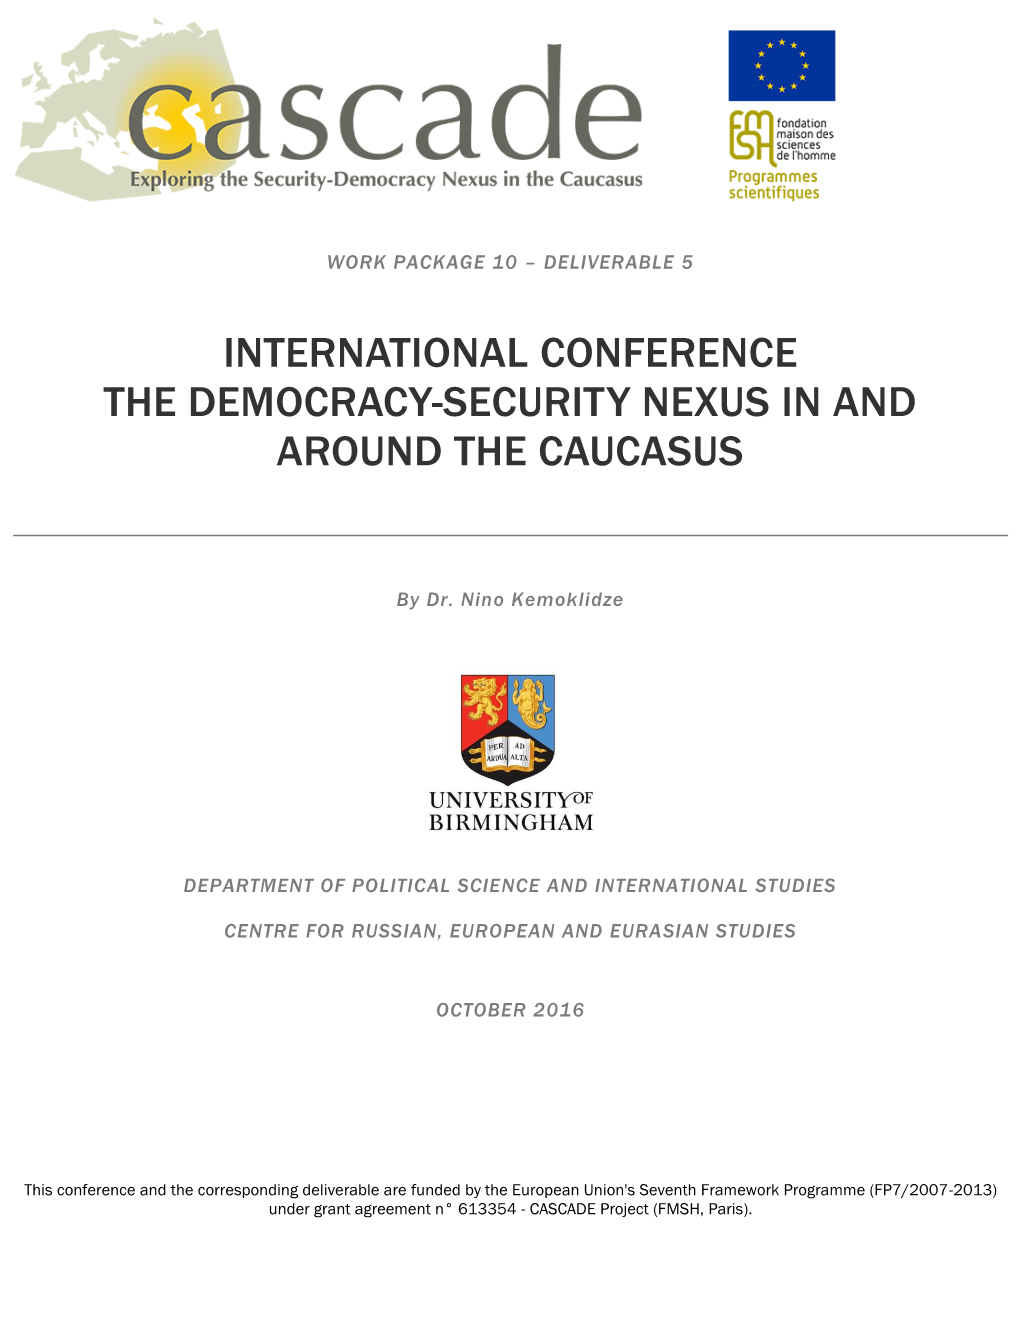 International Conference the Democracy-Security Nexus in and Around the Caucasus